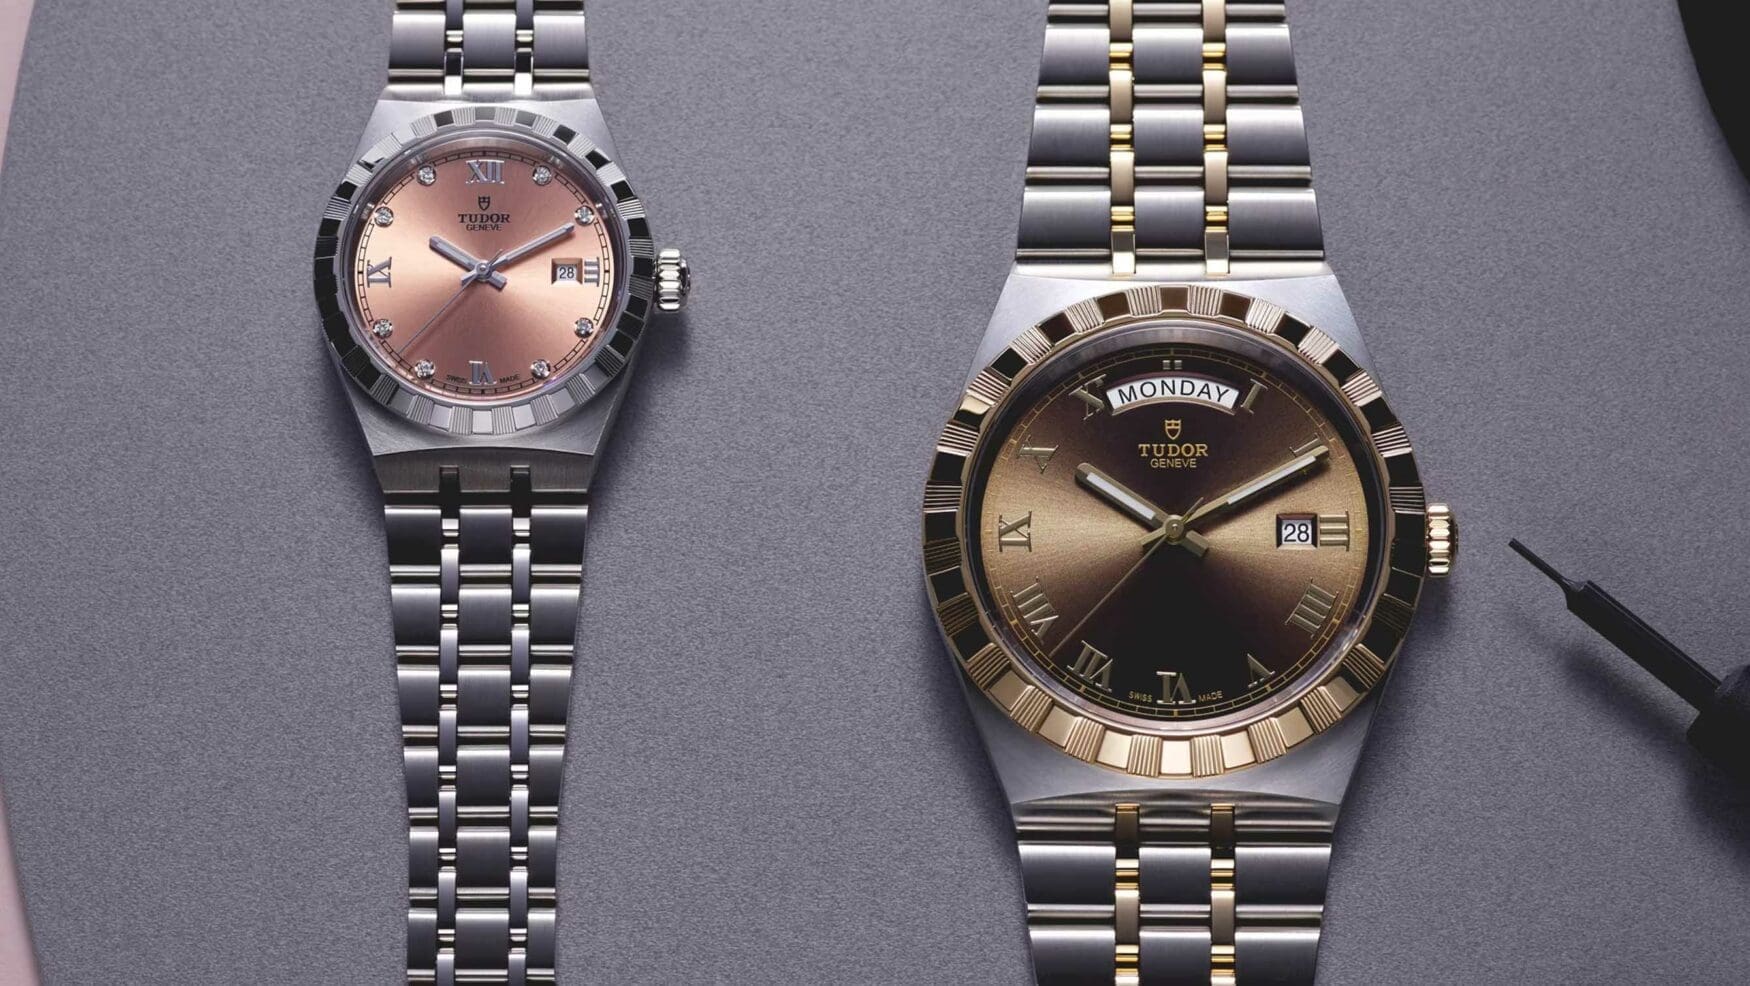 The new Tudor Royal collection offers refined variation